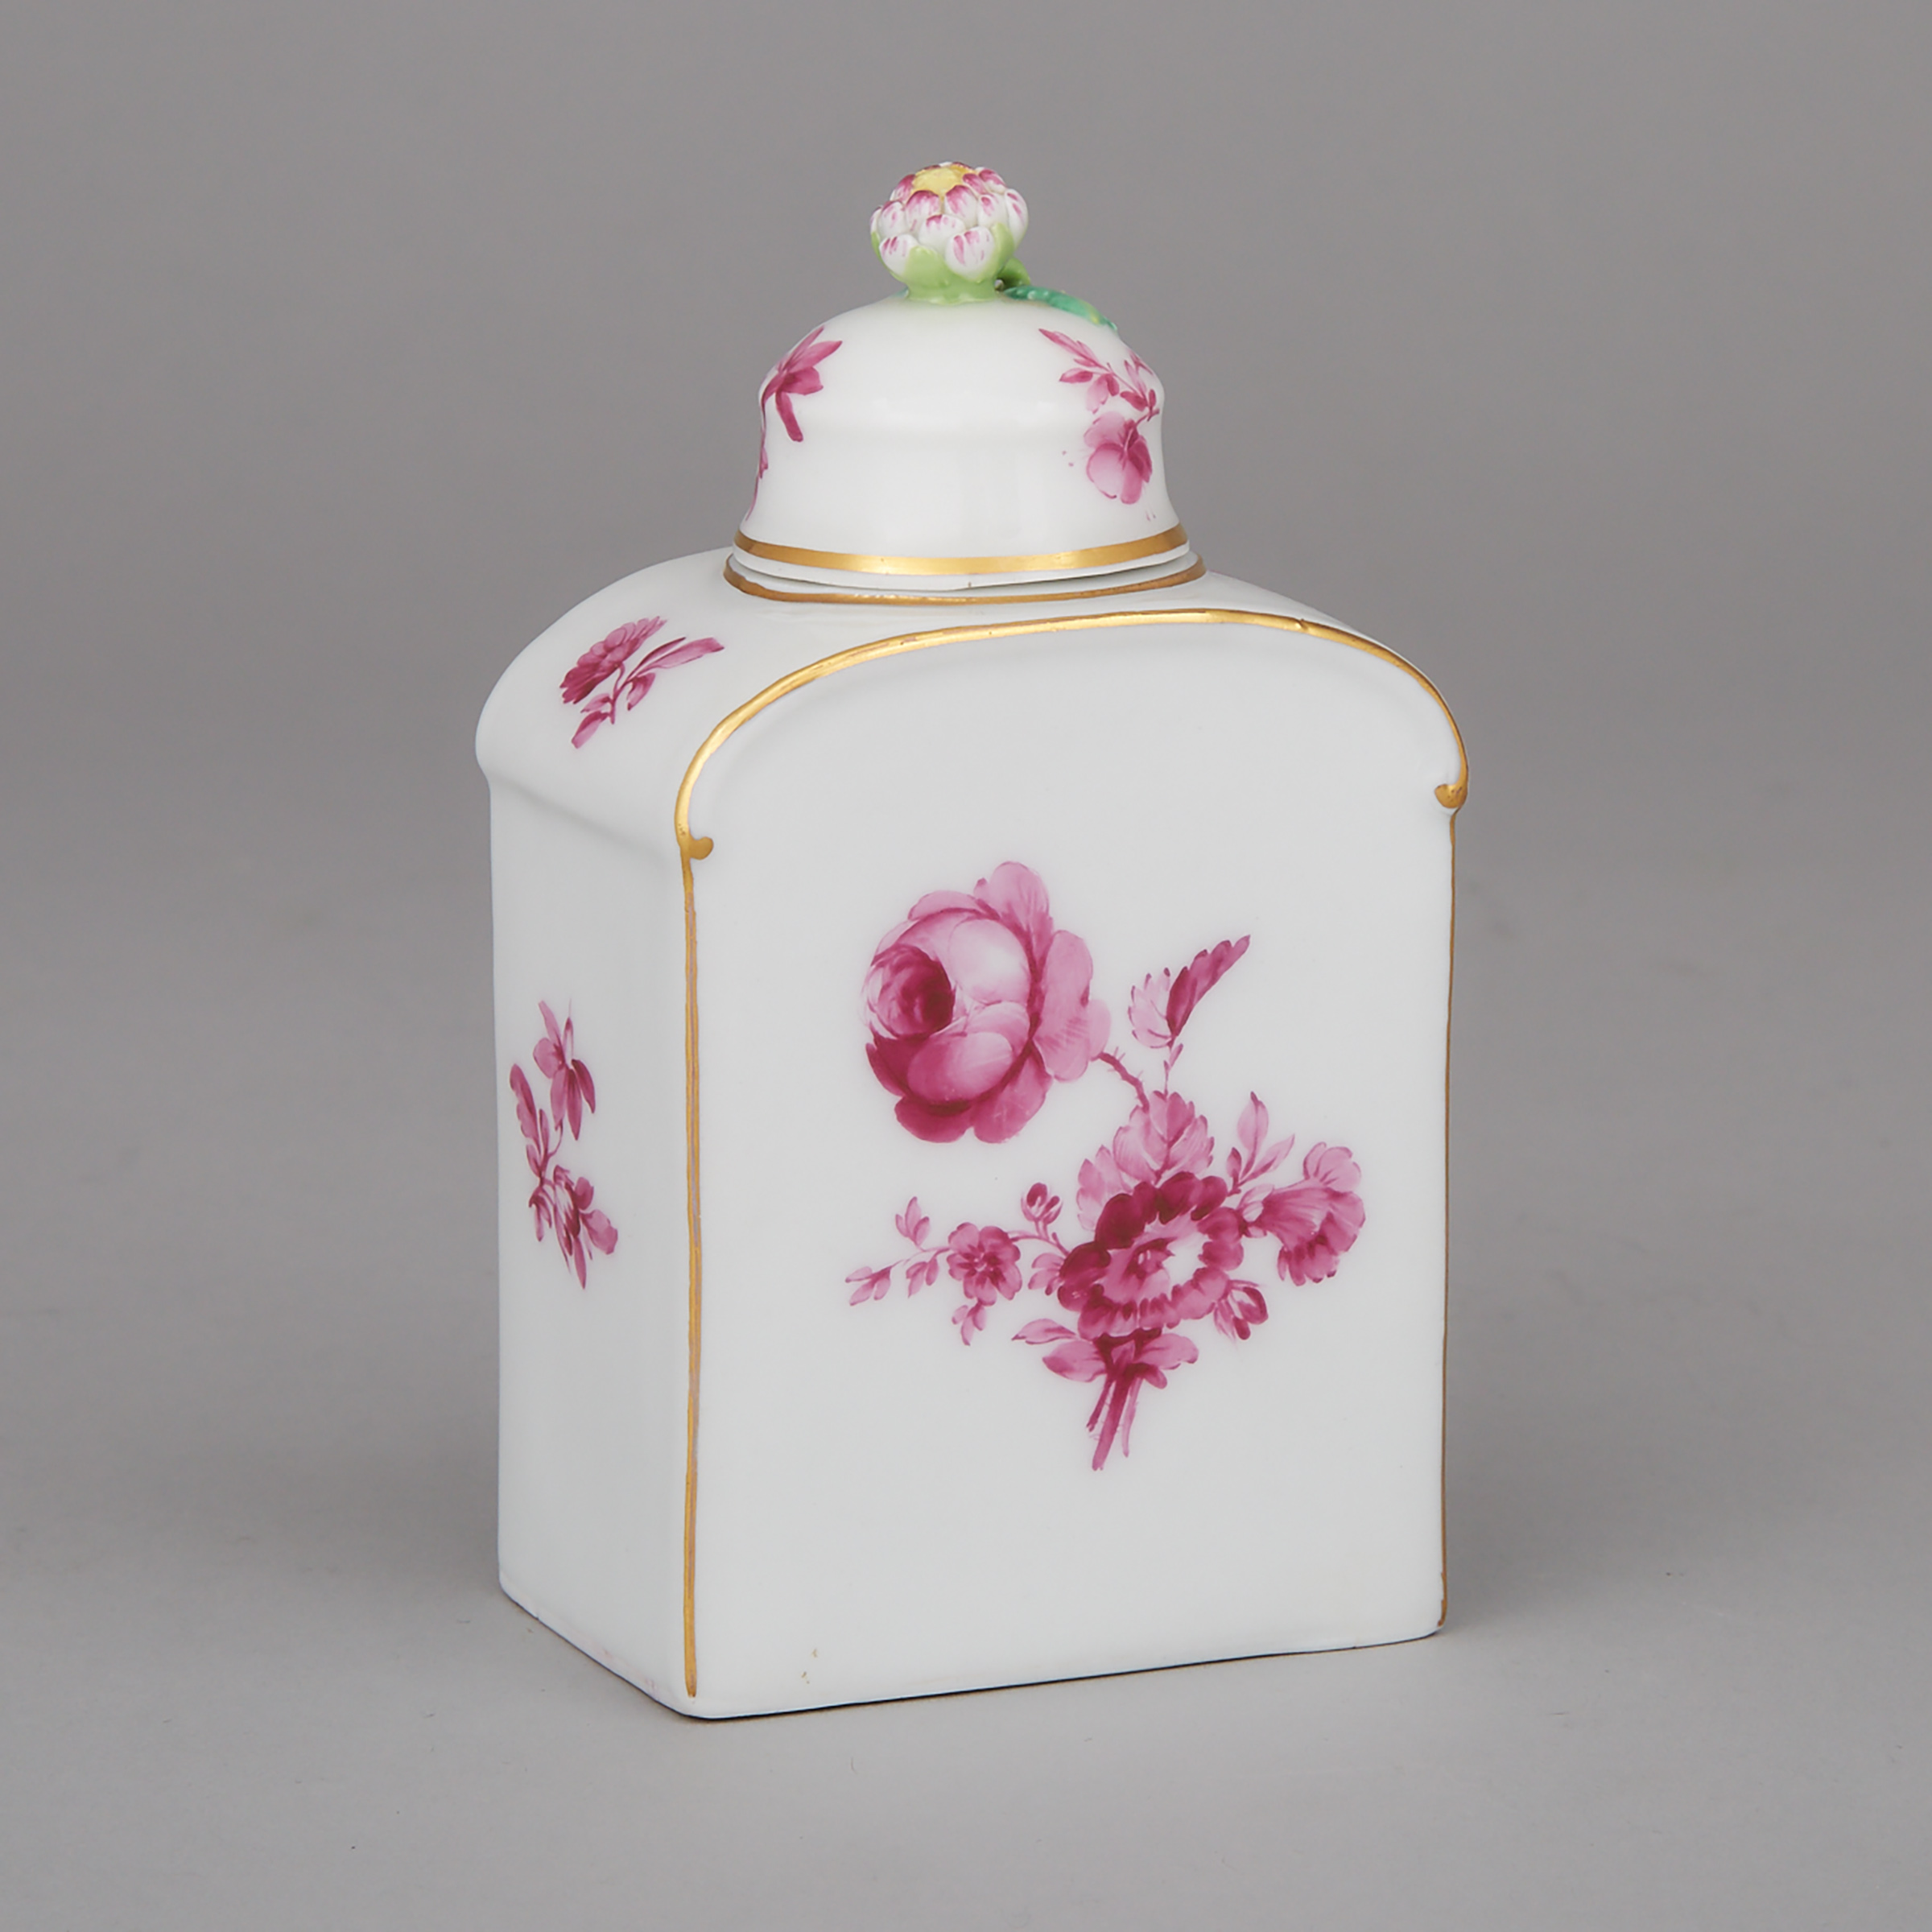 Berlin Tea Canister, late 18th century